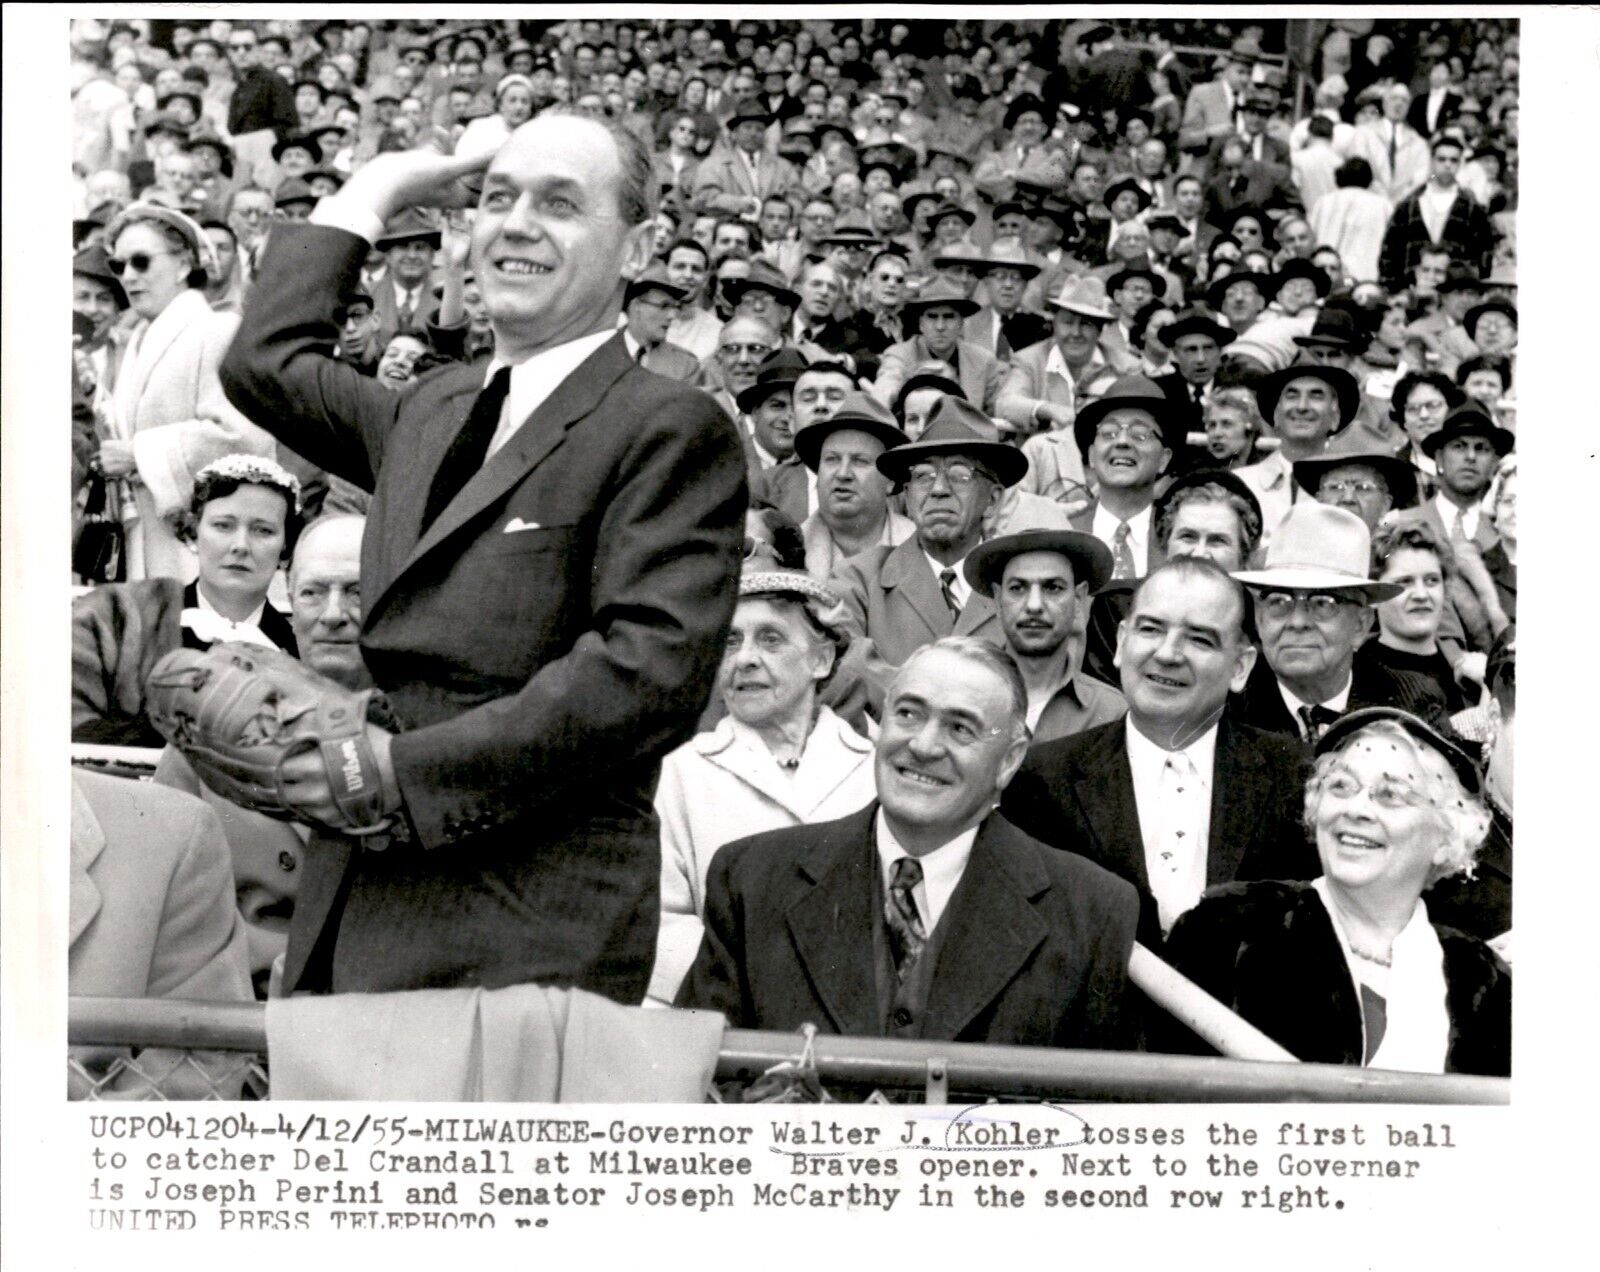 LD348 1955 Wire Photo GOVERNOR WALTER KOHLER THROWS 1ST BALL MILW BRAVES OPENER